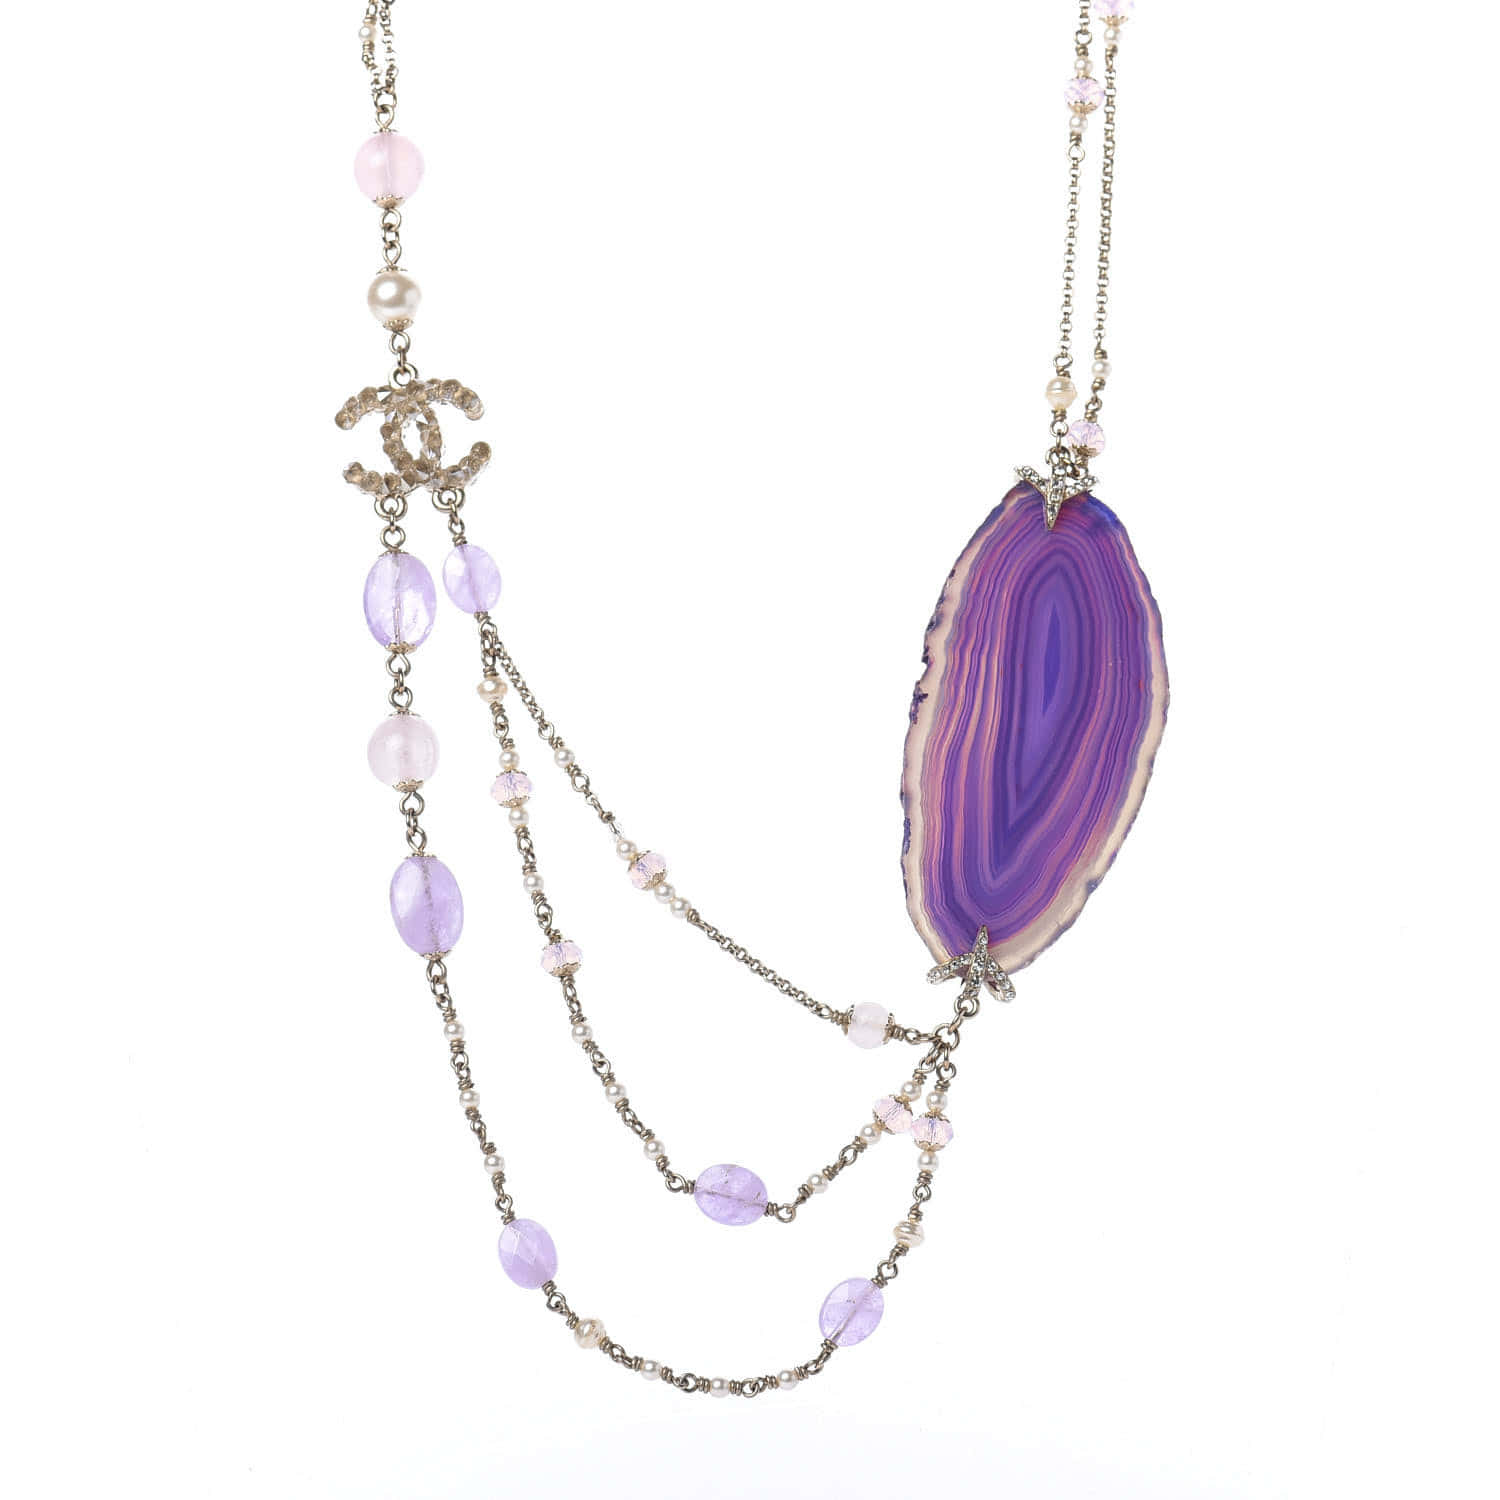 Enchanting Purple Jewelry Adds a Sense of Elegance to any Outfit Wallpaper